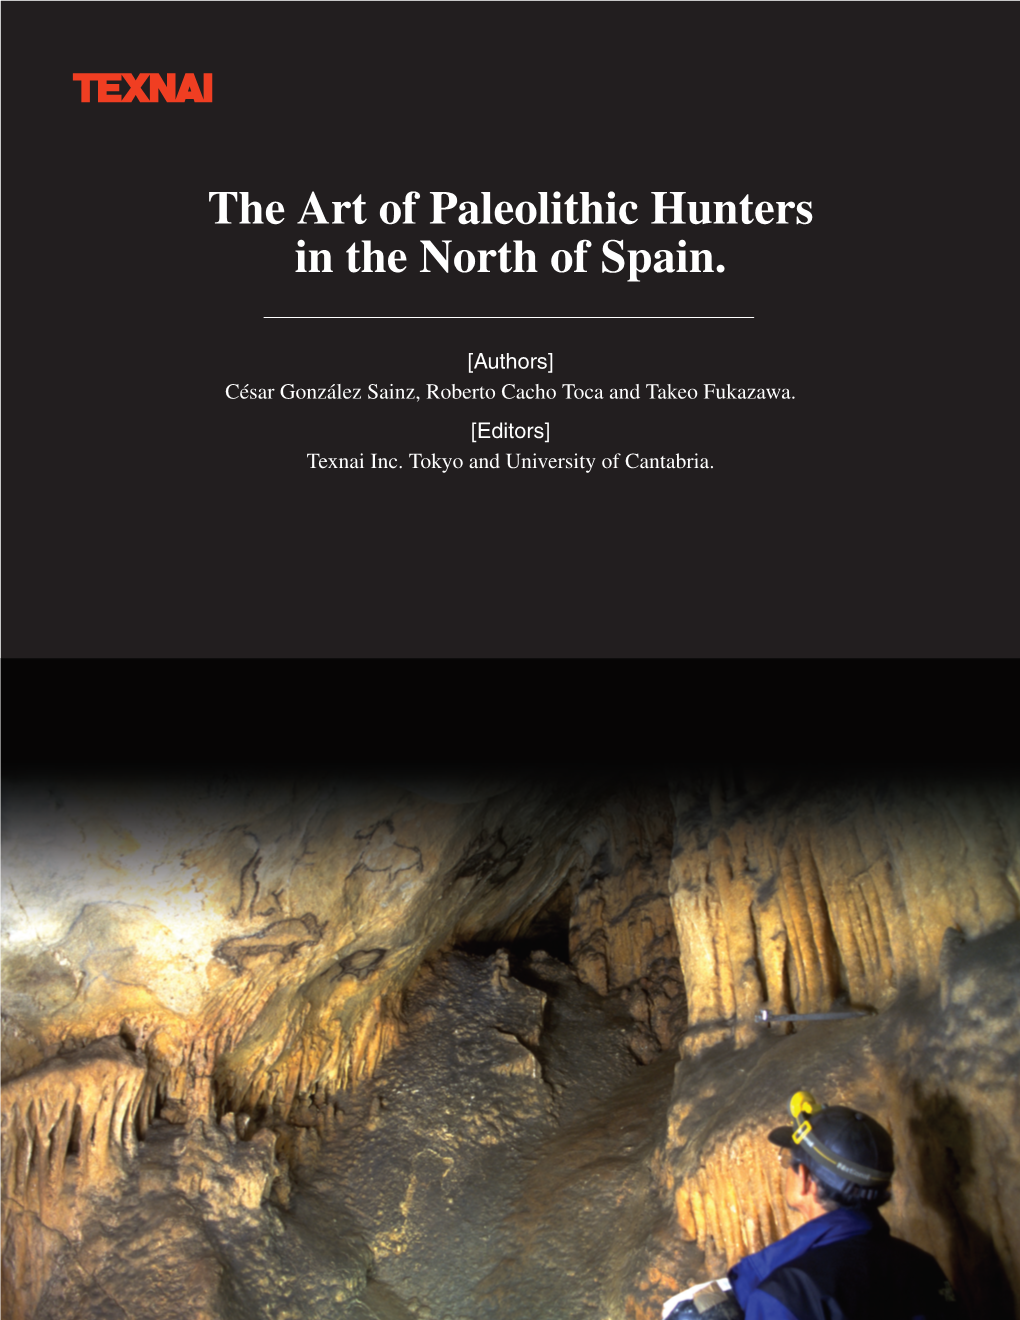 The Art of Paleolithic Hunters in the North of Spain